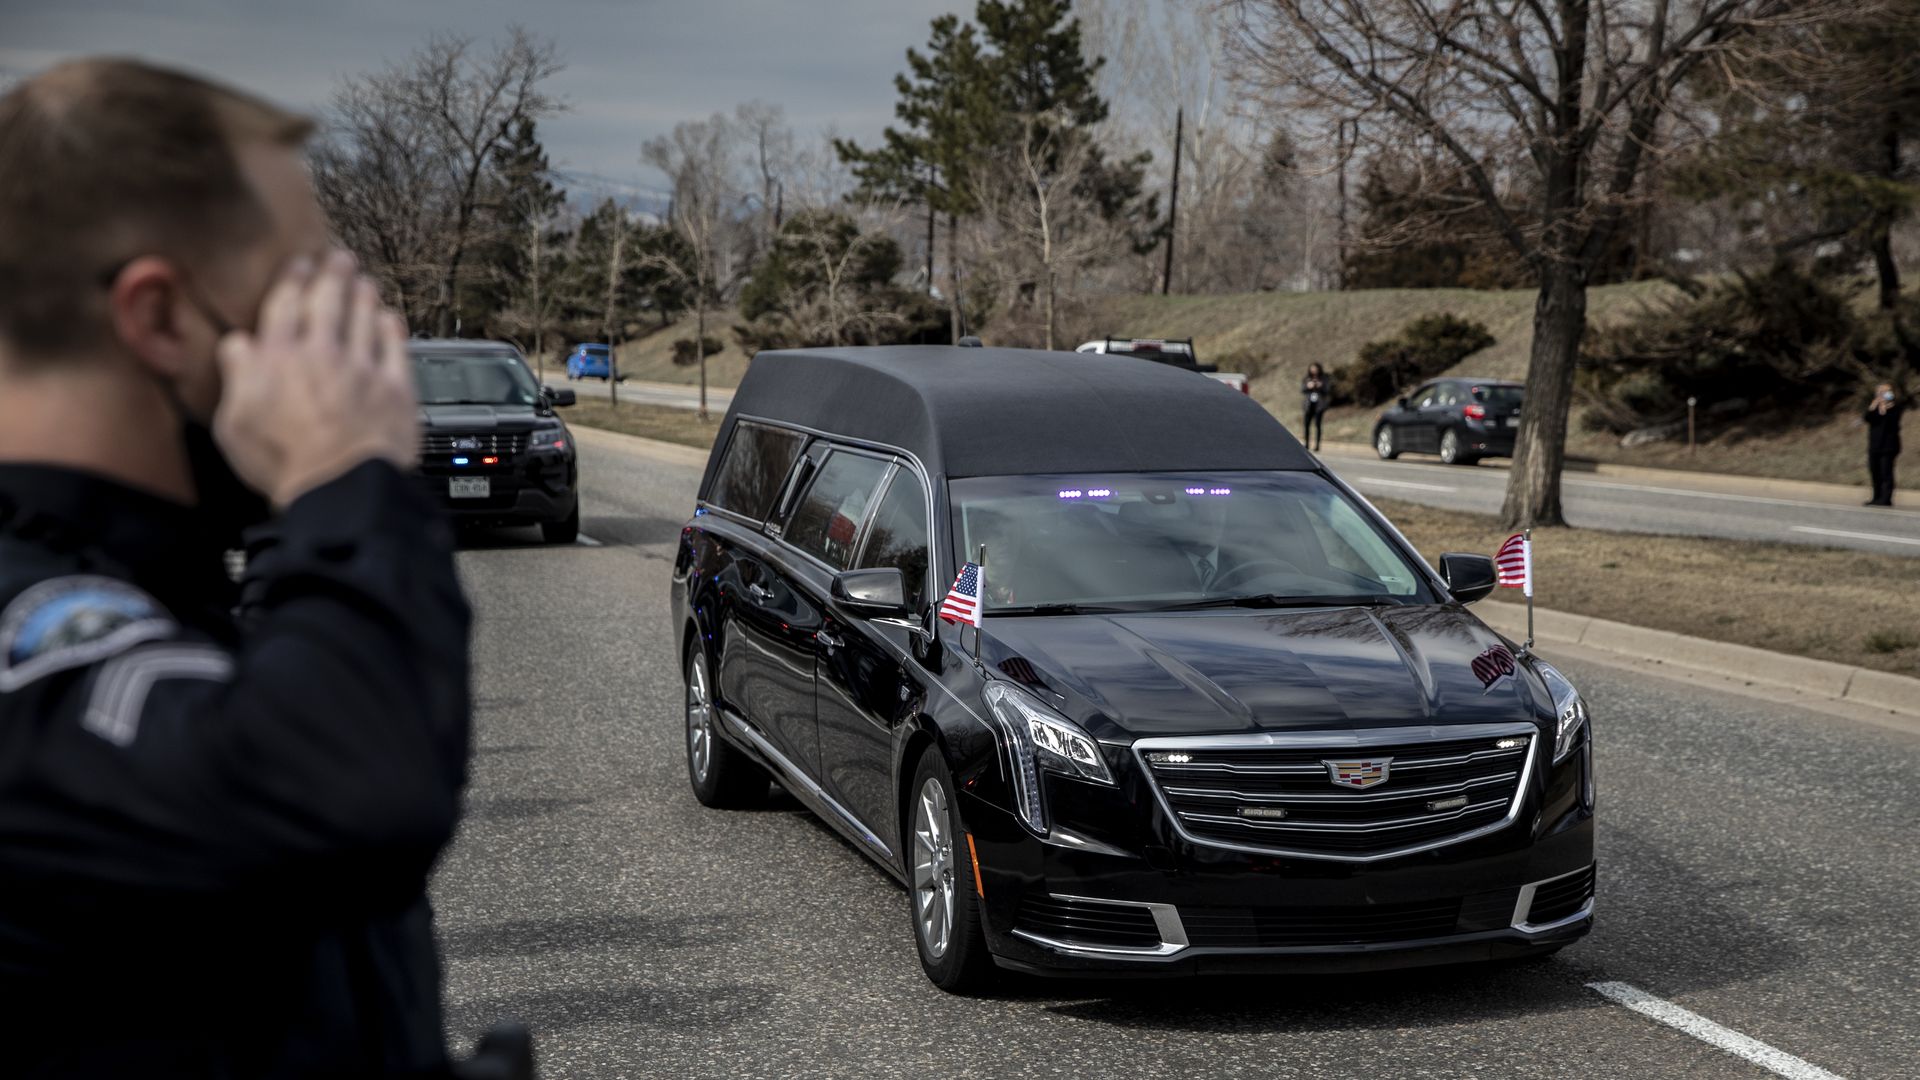 A police officer is seen saluting a hearse carrying the body of slain Boulder Police Officer Eric Talley.